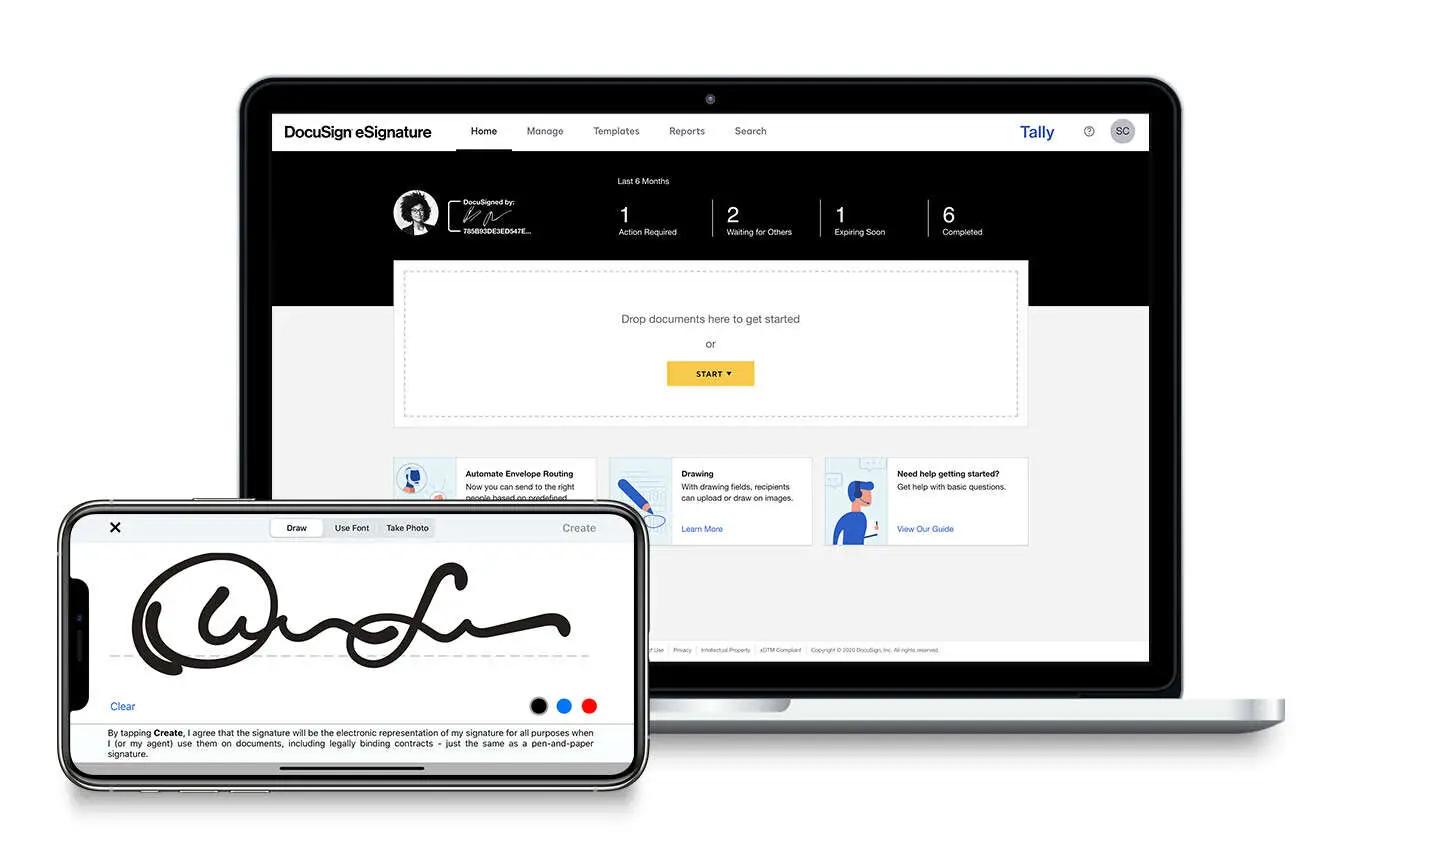 A phone showing a signaure in front of a laptop showing a home screen within DocuSign eSignature that prompts users to drop in documents to get started